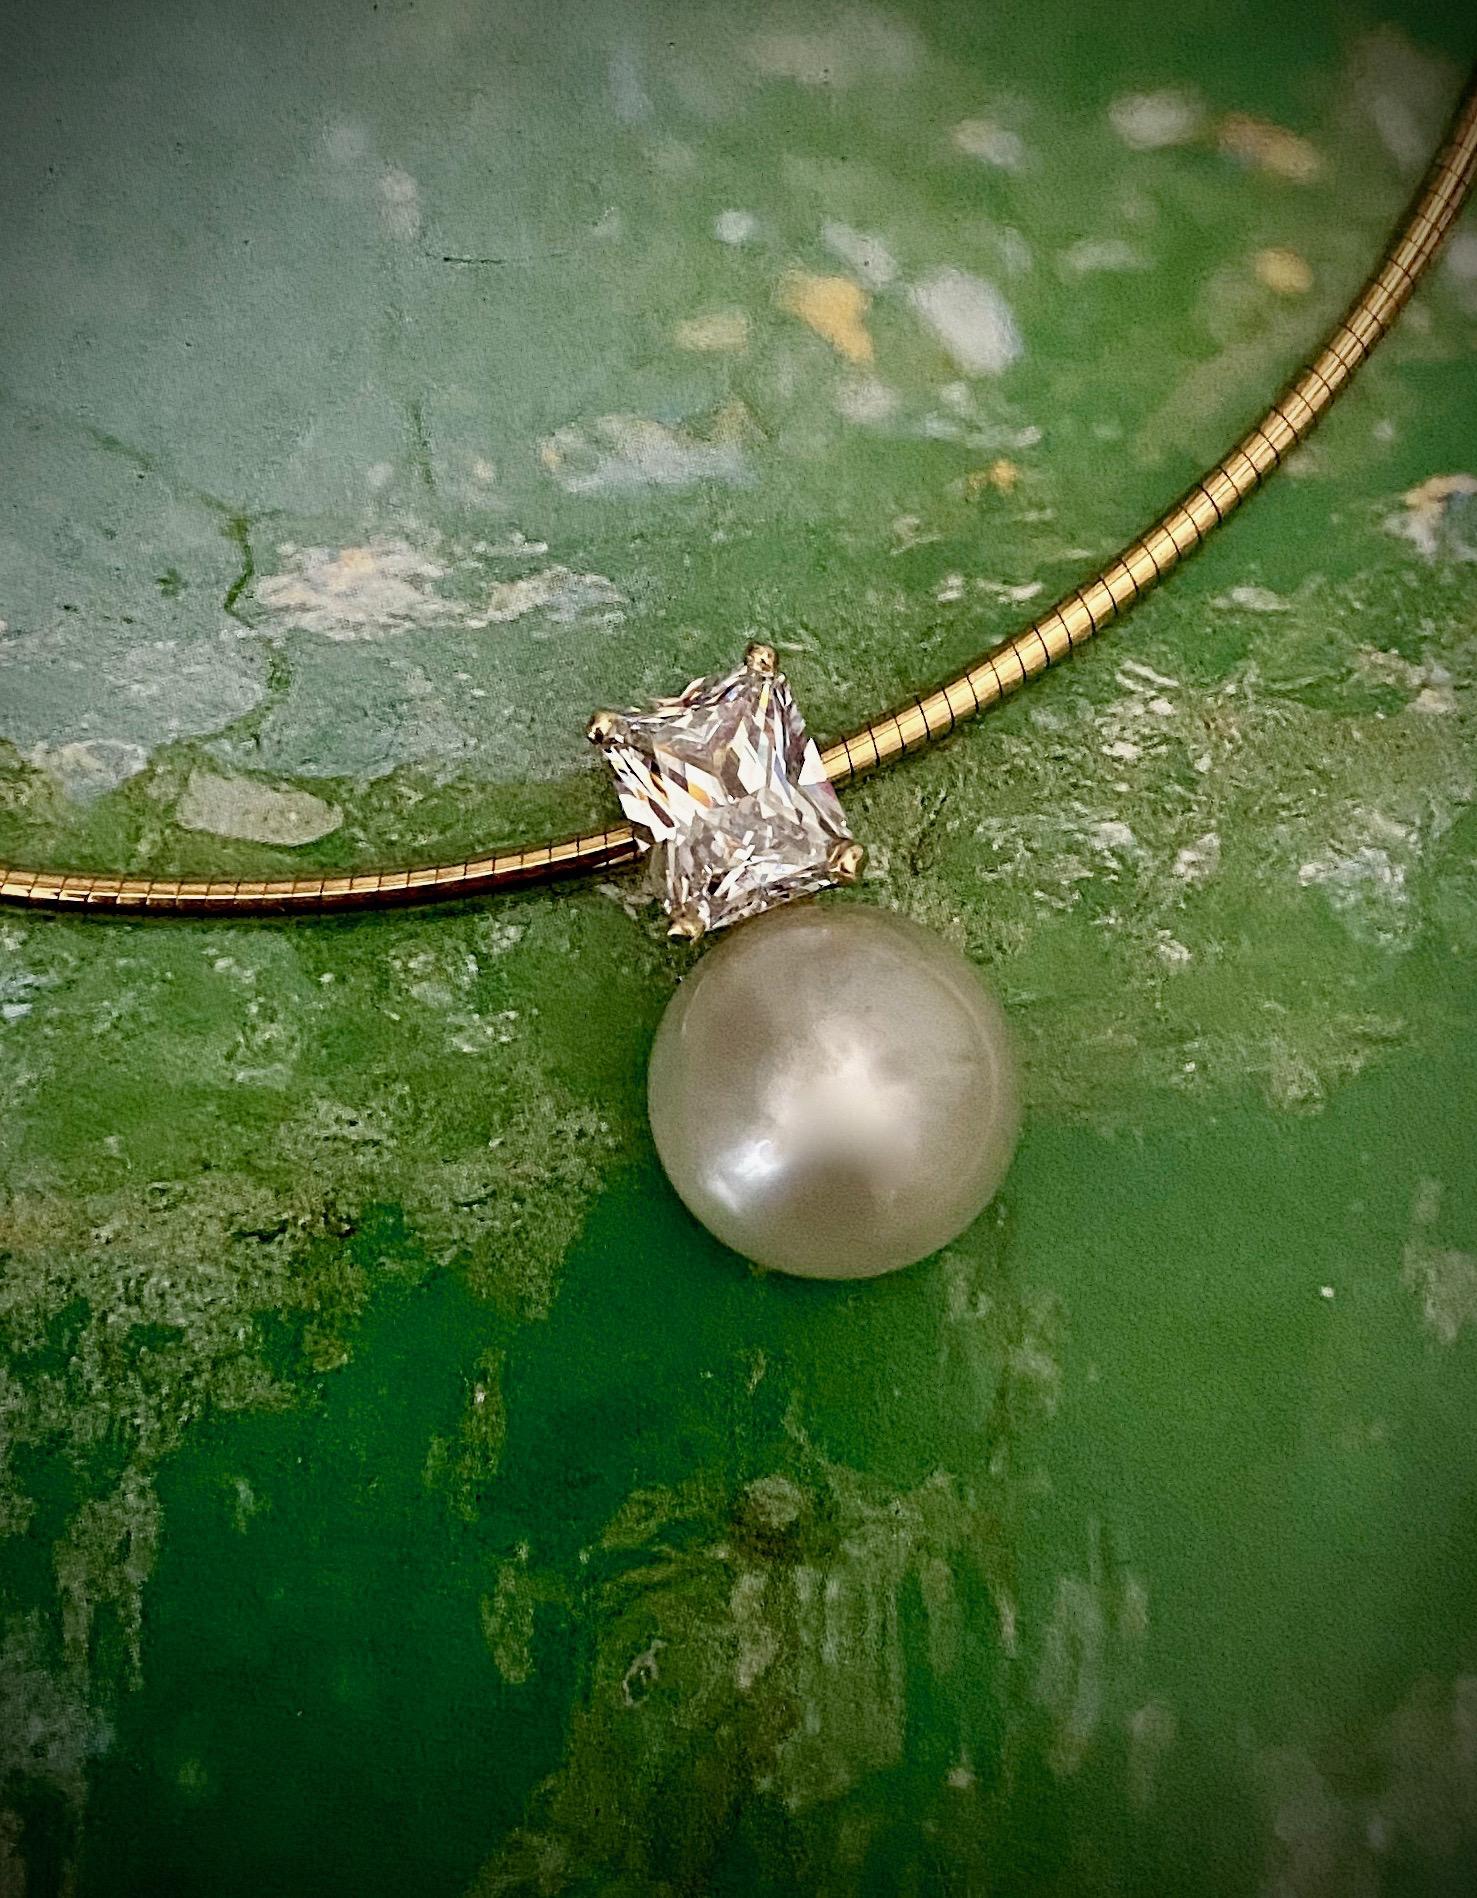 A gem quality Paspaley South Seas pearl is featured in this stunning and uncomplicated pendant.  Paspaley is the largest cultivator of South Seas pearls in Australia.  This specimen possesses an exquisite luster, is blemish free and has a